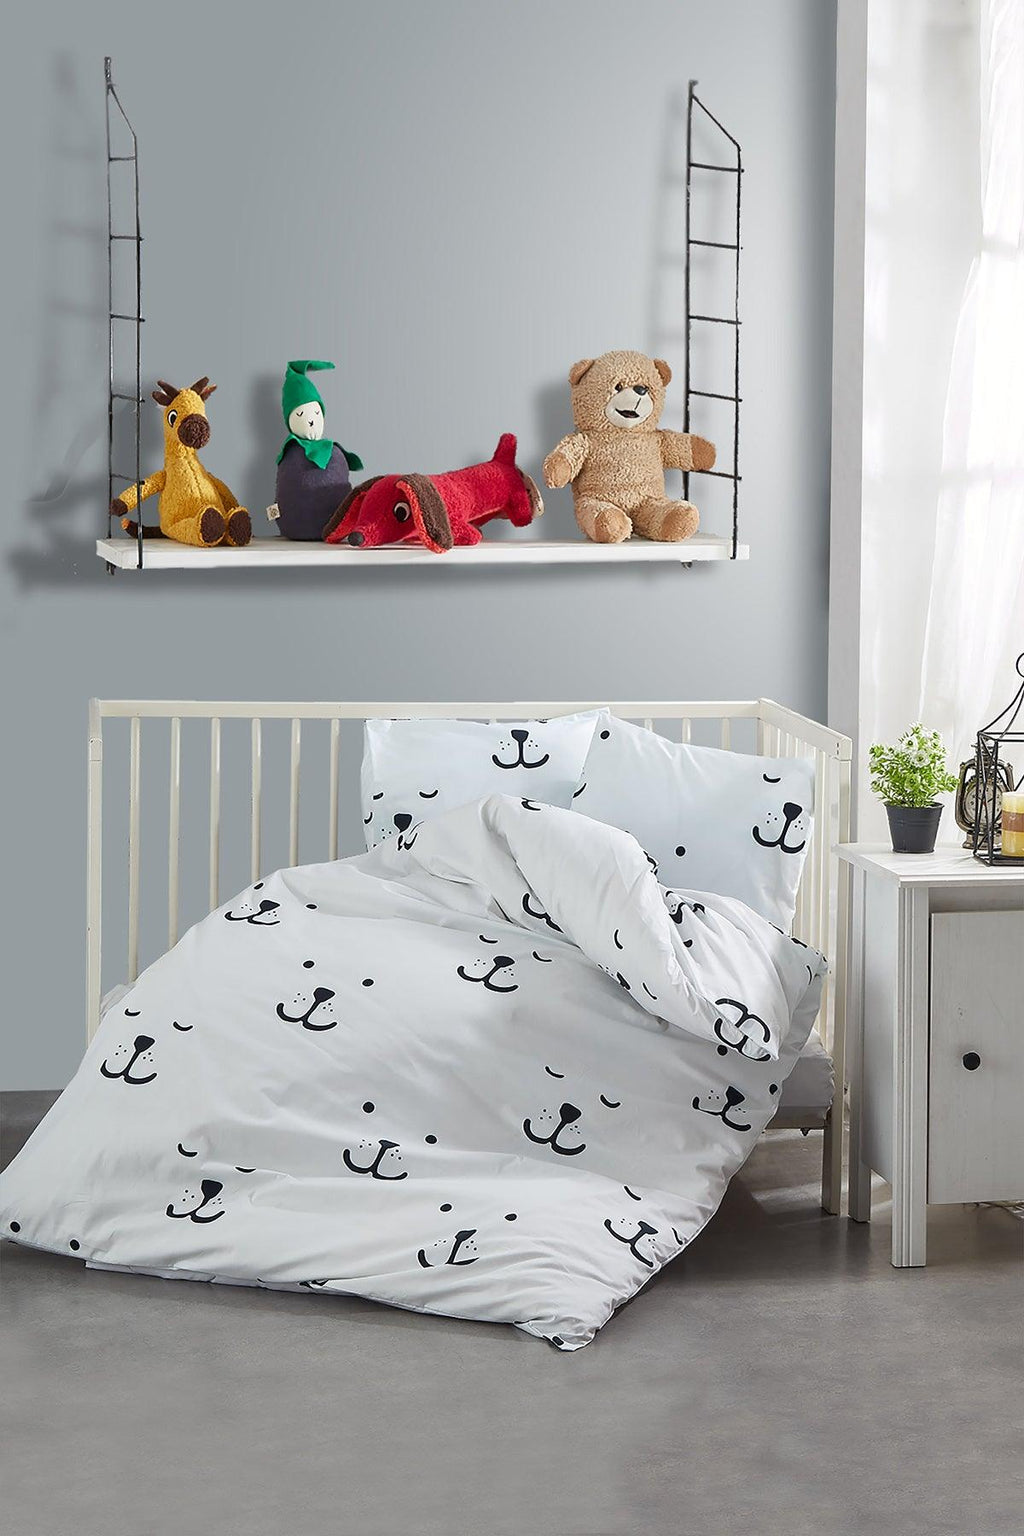 100% Turkish Cotton Baby Duvet Cover Set of 4  Size  Duvet cover: 100 cm x 150 cm  Flatsheet :120 cm x 160 cm  Pillows :35 cm x 45 cm each  Please note that the duvet is not included.   Product Details  Complete your little one's bedding with the cute panda design on the duvet set. Made from 100 % Turkish Cotton, our machine washable sets consist of a duvet cover, a flat sheet and two matching pillow cases. Little ones will absolutely enjoy snuggling into soft cotton fabric. Sweet dreams :)